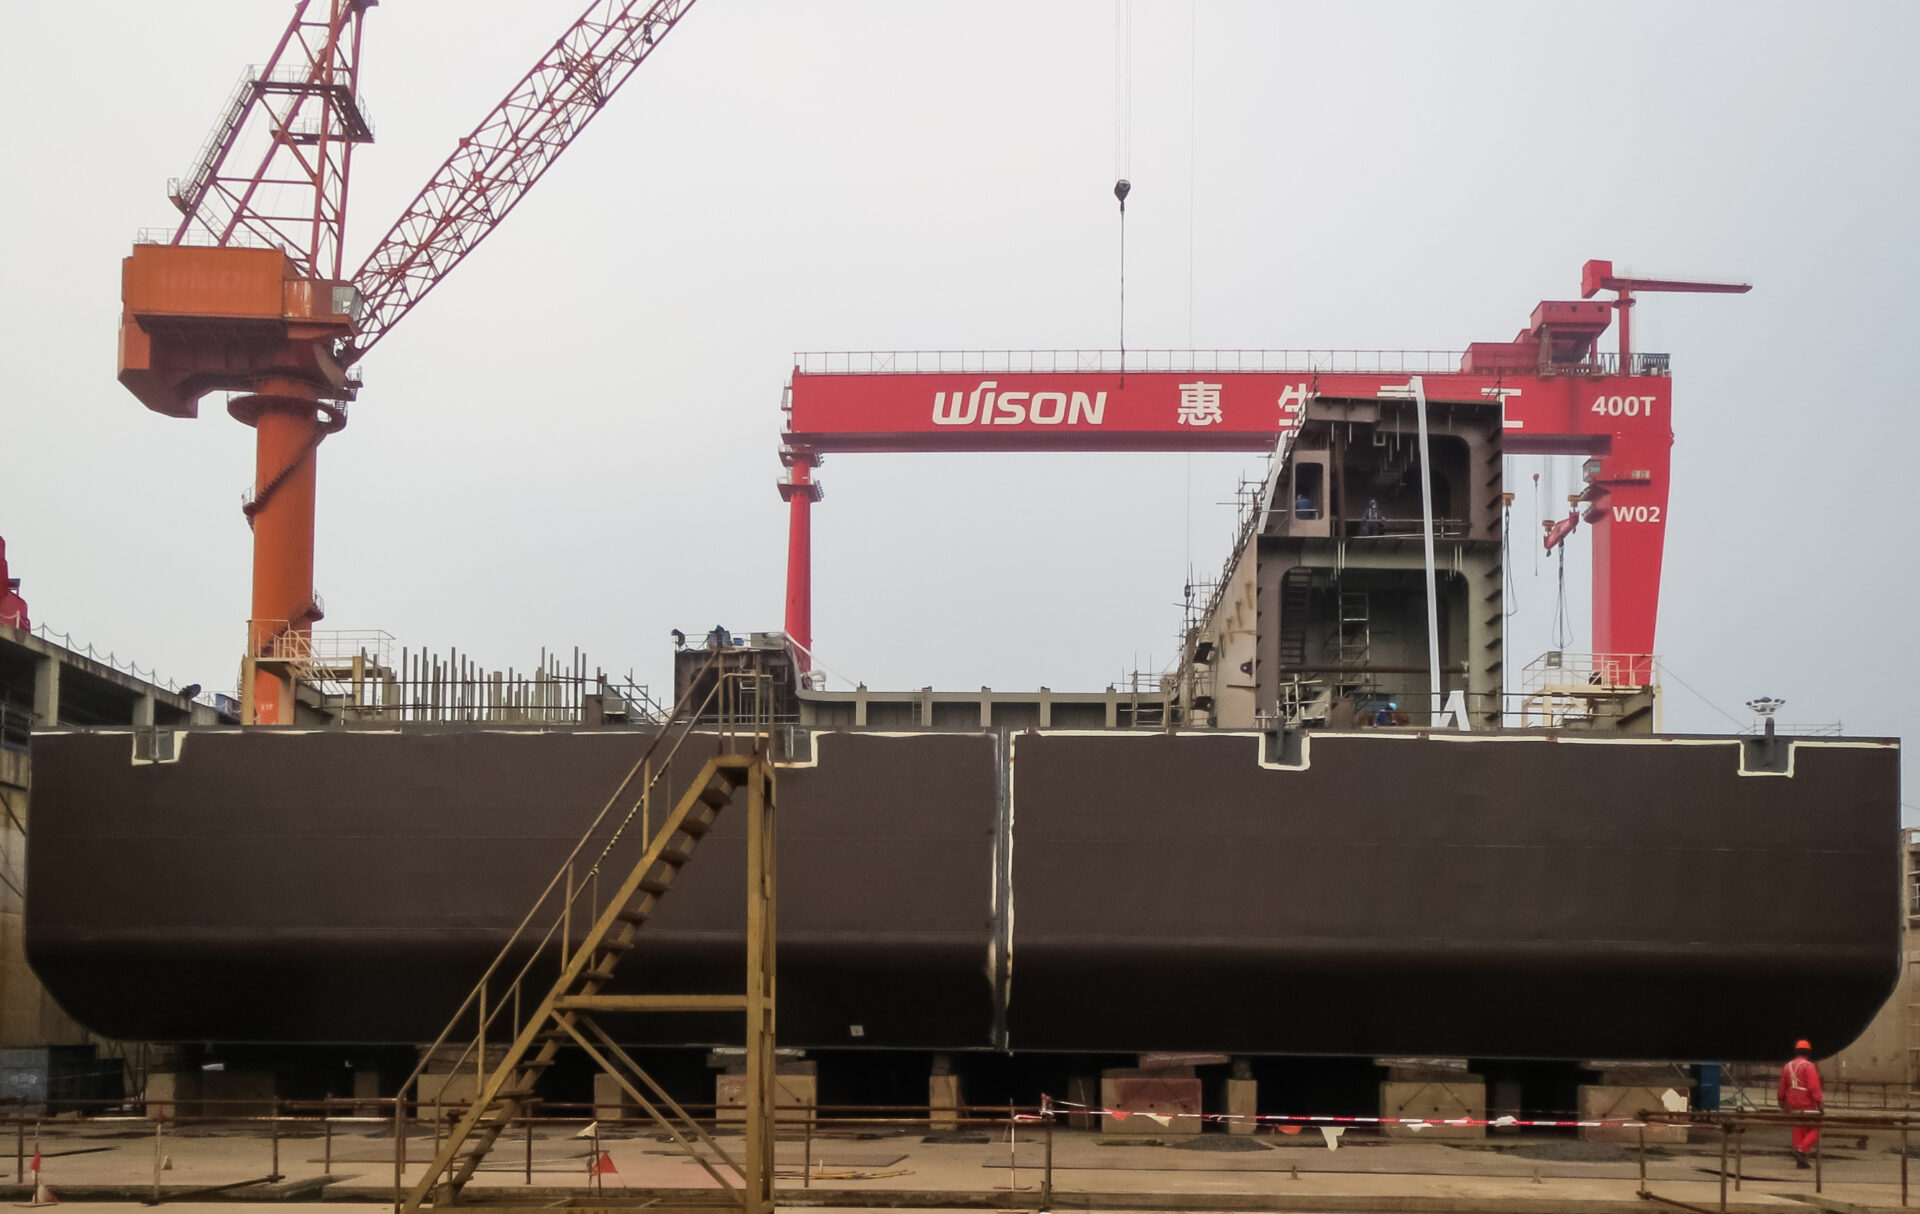 The Caribbean FLNG being assembled at the Wison shipyard.